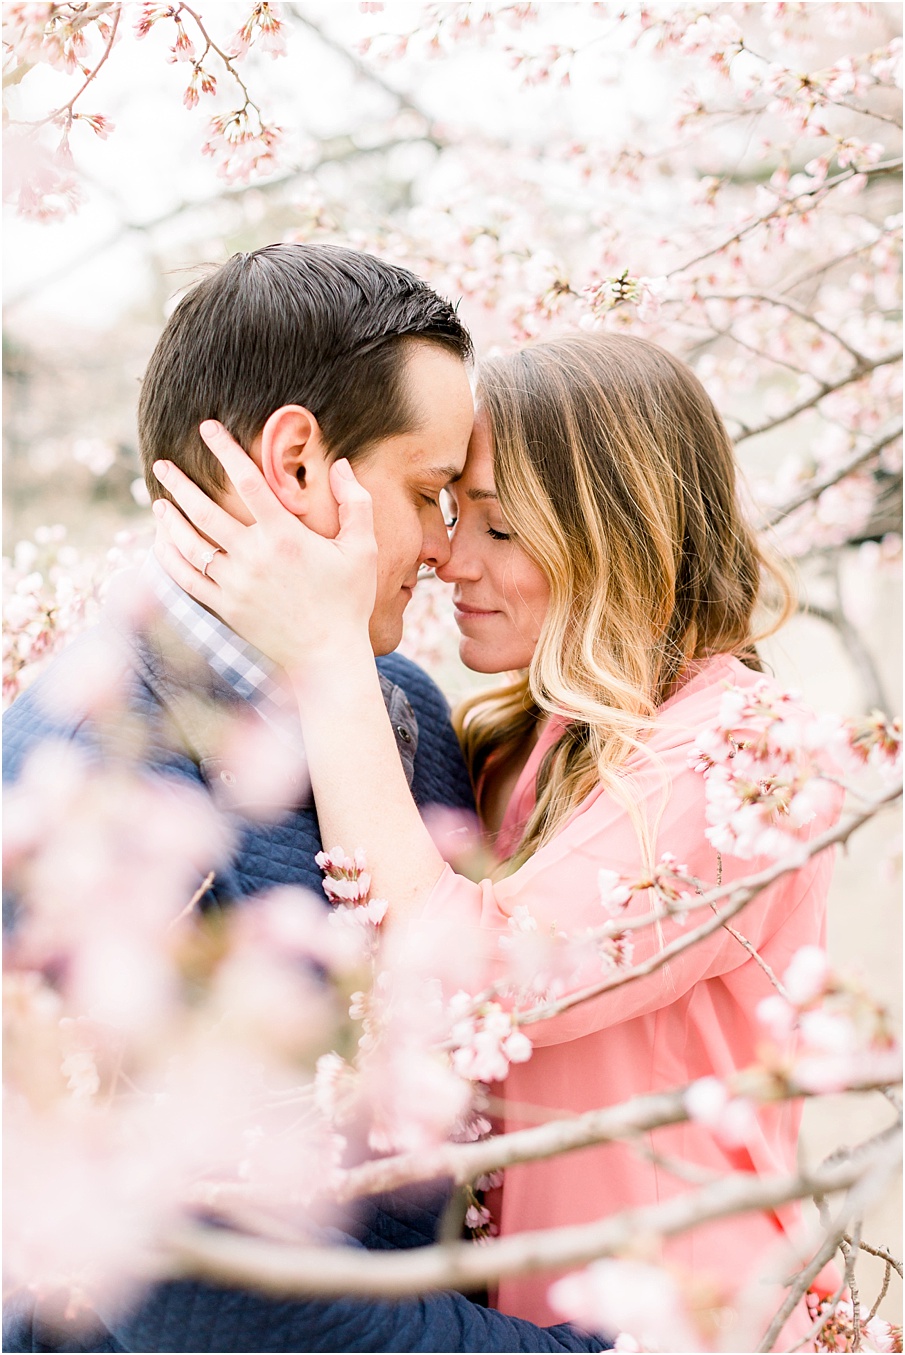 Cherry Blossom engagement sessions are popular in Washington DC during the peak season. This tidal basin cherry blossom session was held at sunrise and blooms were every where.